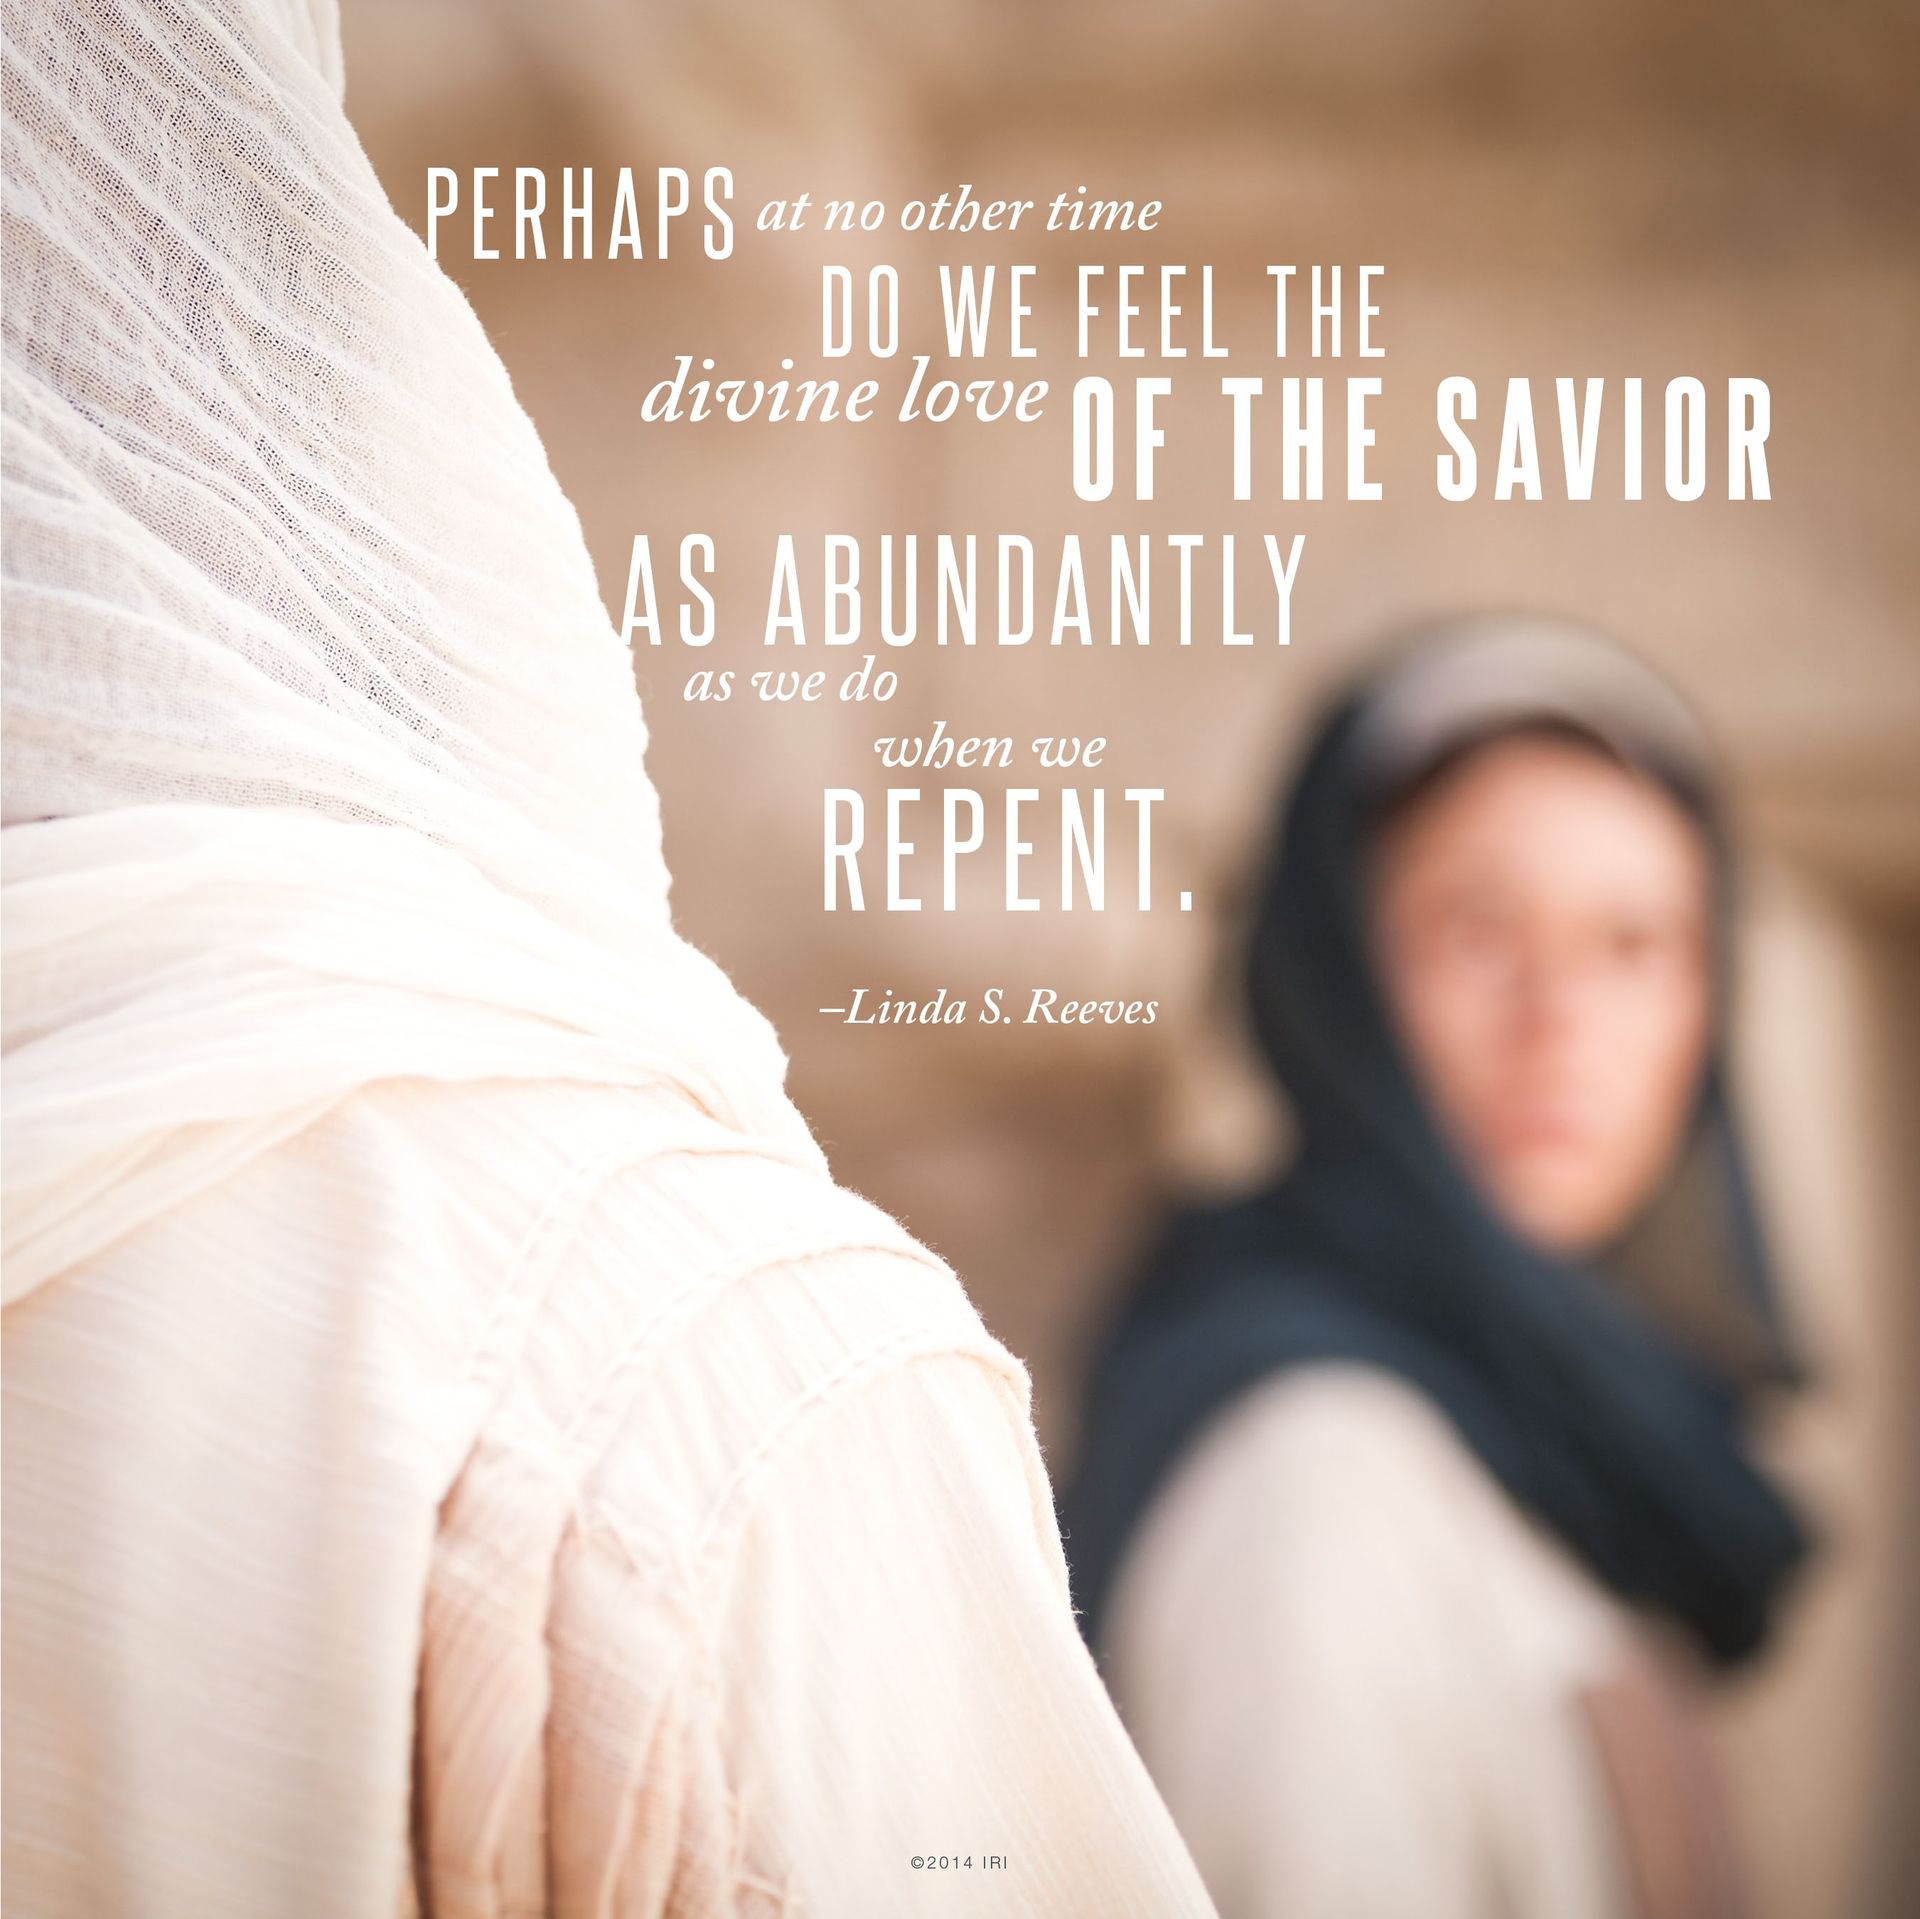 “Perhaps at no other time do we feel the divine love of the Savior as abundantly as we do when we repent.”—Sister Linda S. Reeves, “Claim the Blessings of Your Covenants” © undefined ipCode 1.